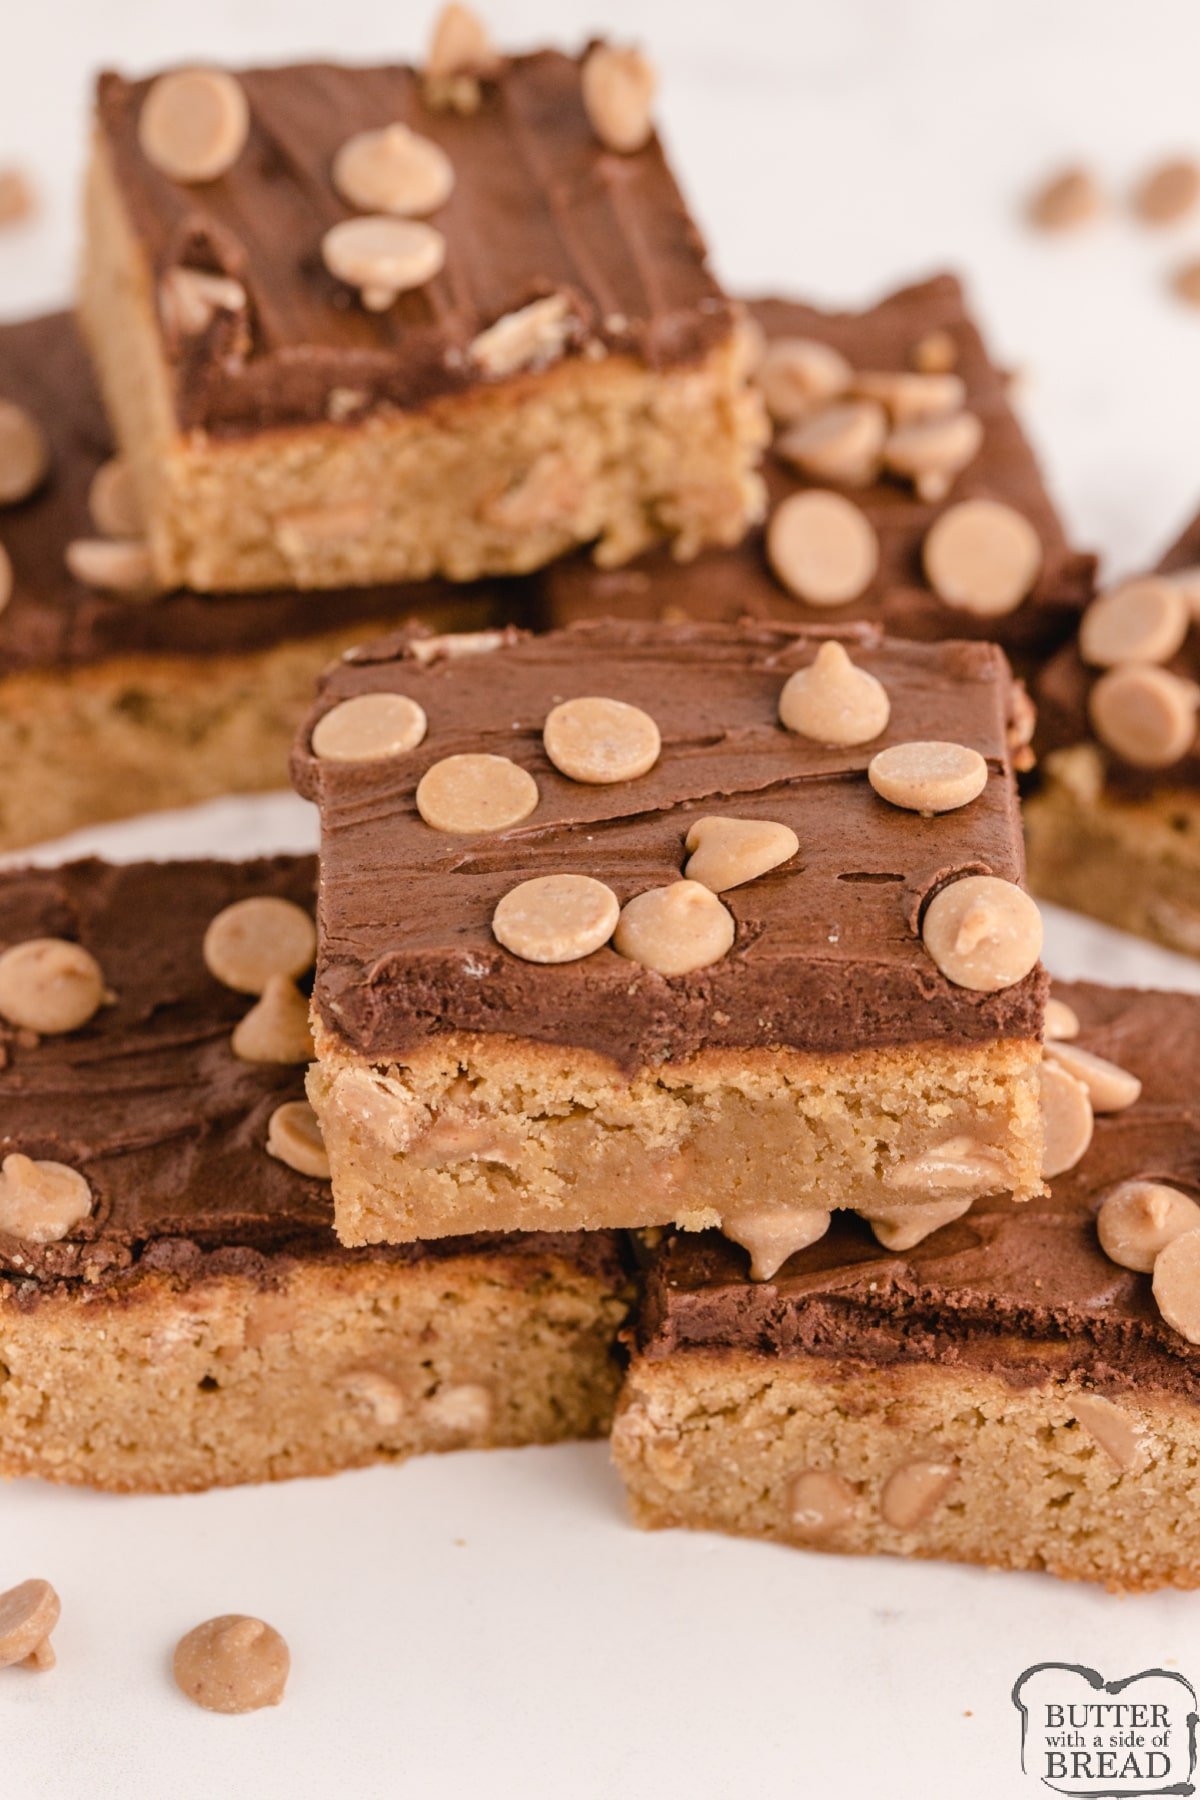 Peanut Butter Blondies are thick and chewy peanut butter bars topped with a homemade chocolate frosting. 